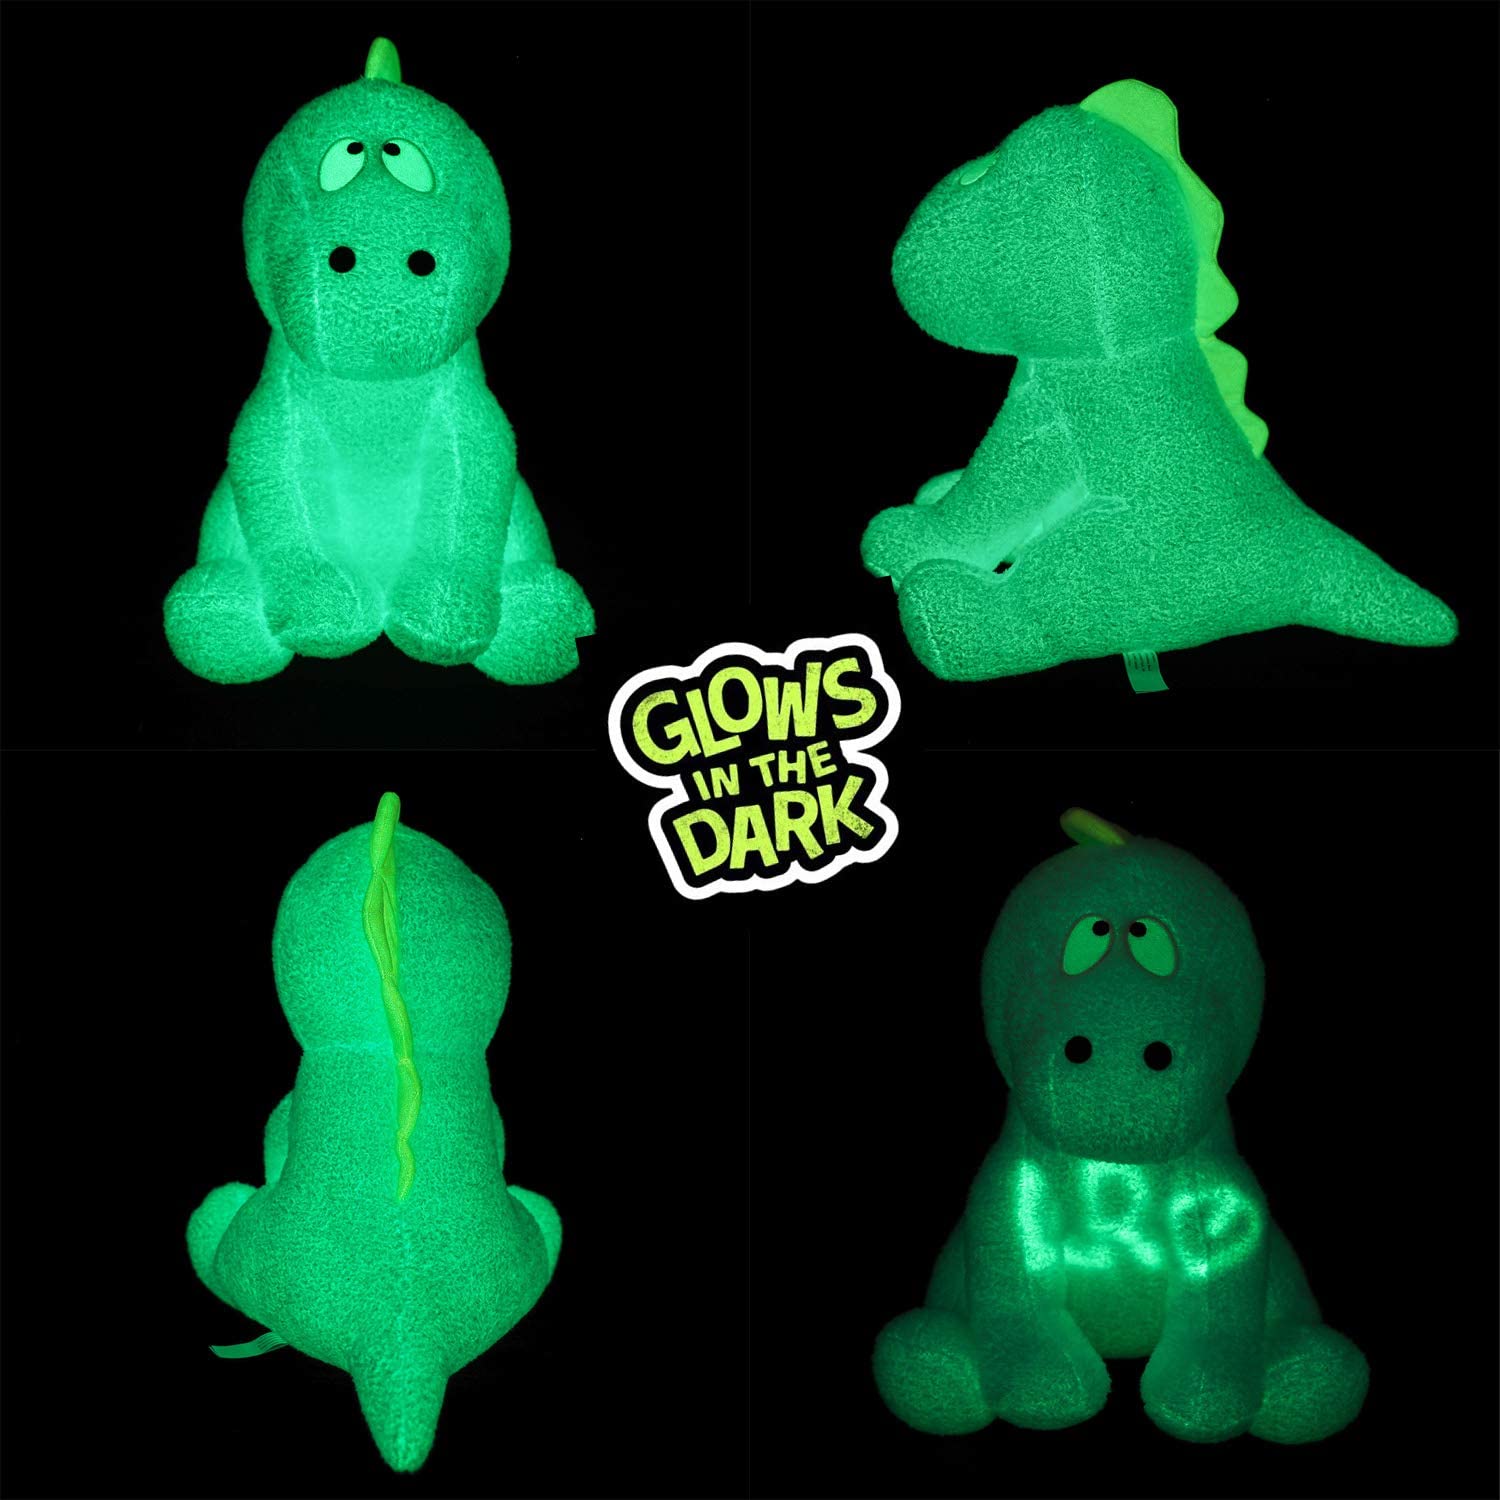 Little Room Naturally Glow in The Dark Dinosaur Stuffed Animal Plush Toy, 14 Inches, Blue (L1000)